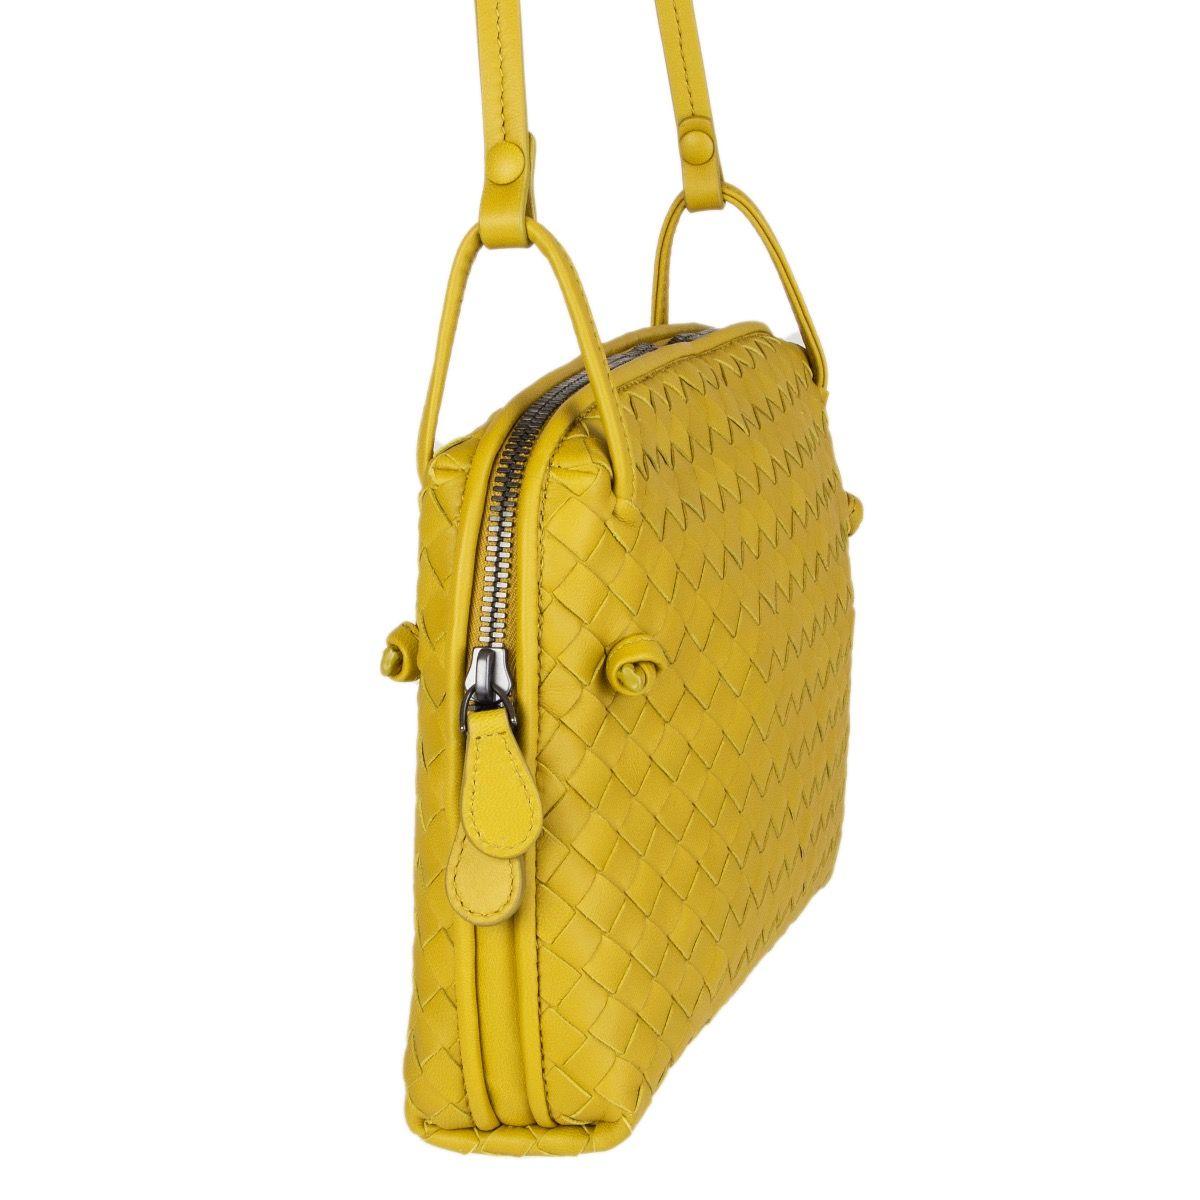 Bottega Veneta 'Nodini' cross-body in chartreuse woven nappa leather. Opens with a two-way zipper on top. Lined in dark taupe suede with one open pocket against the front and a zipper pocket against the back. Has an adjustable shoulder strap. Comes